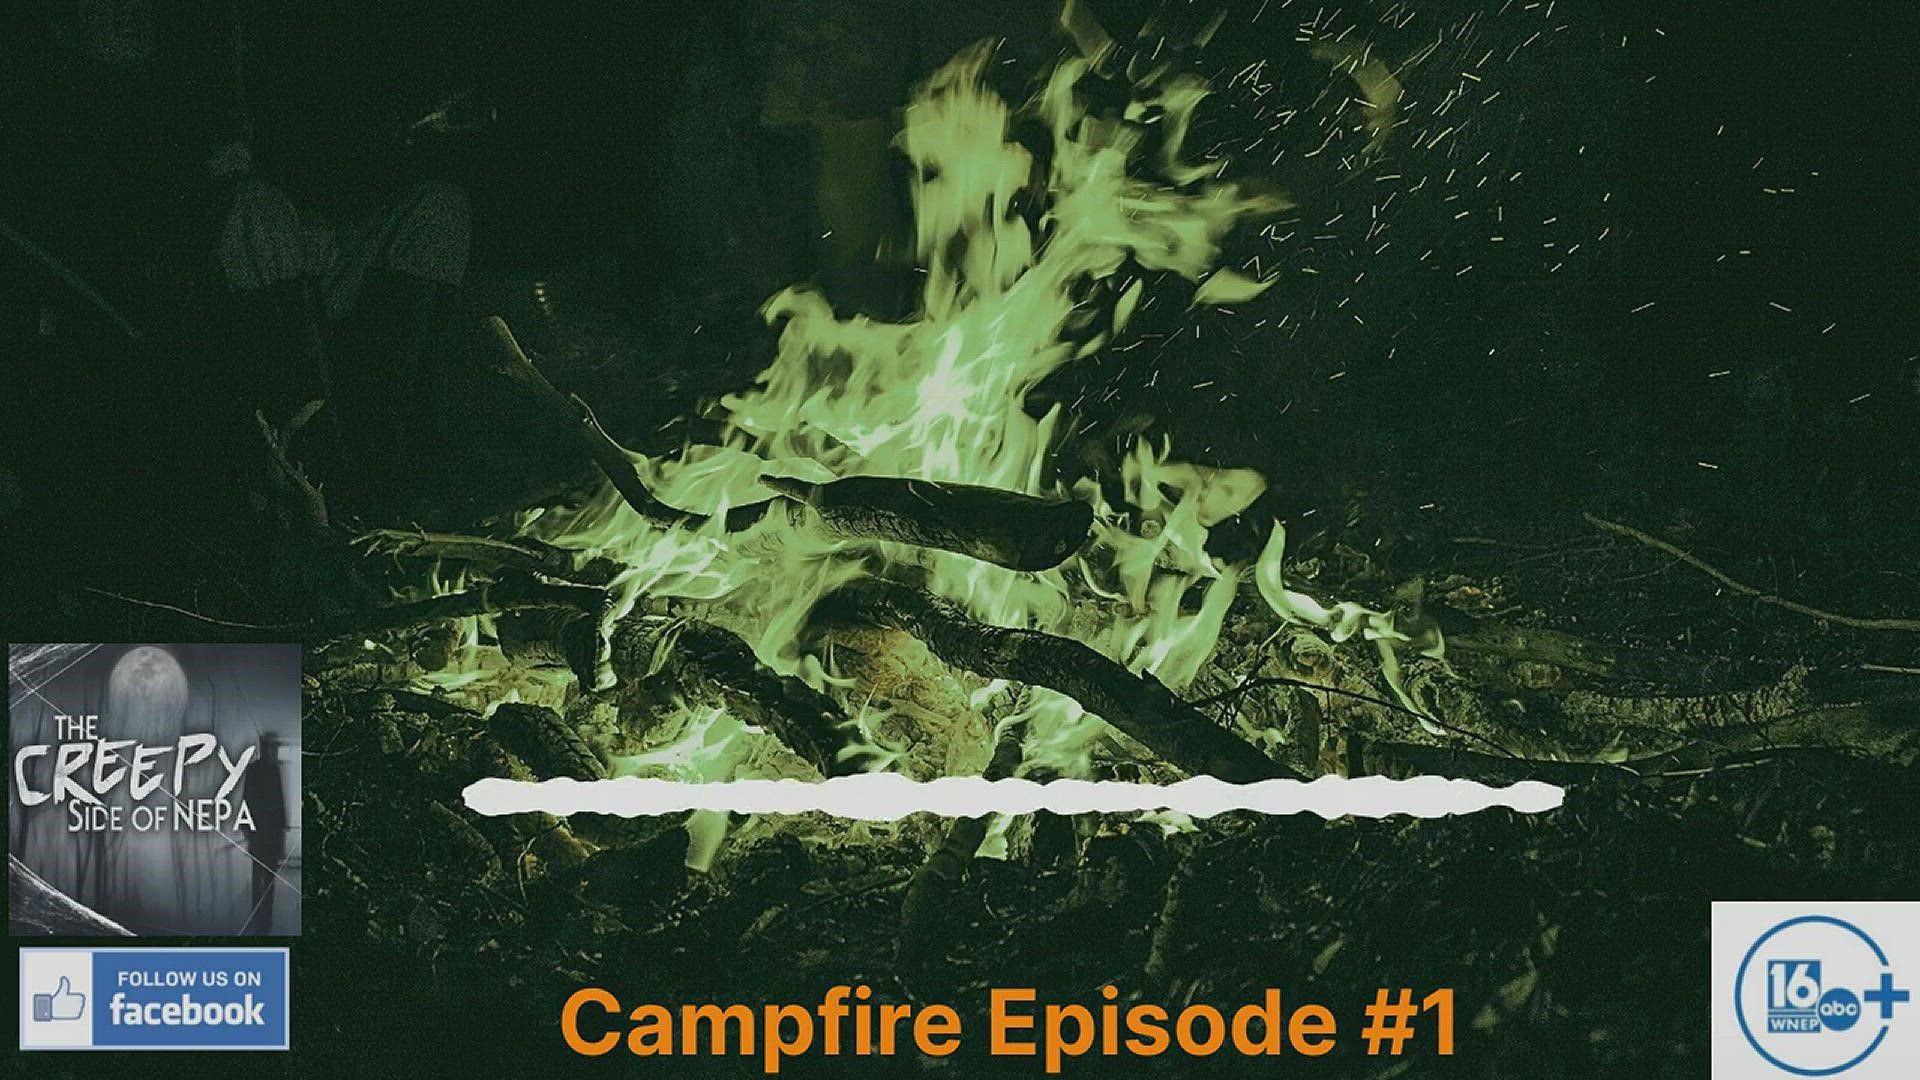 On this episode, some of our WNEP co-workers join us around the virtual campfire and share some of their own personal experiences.